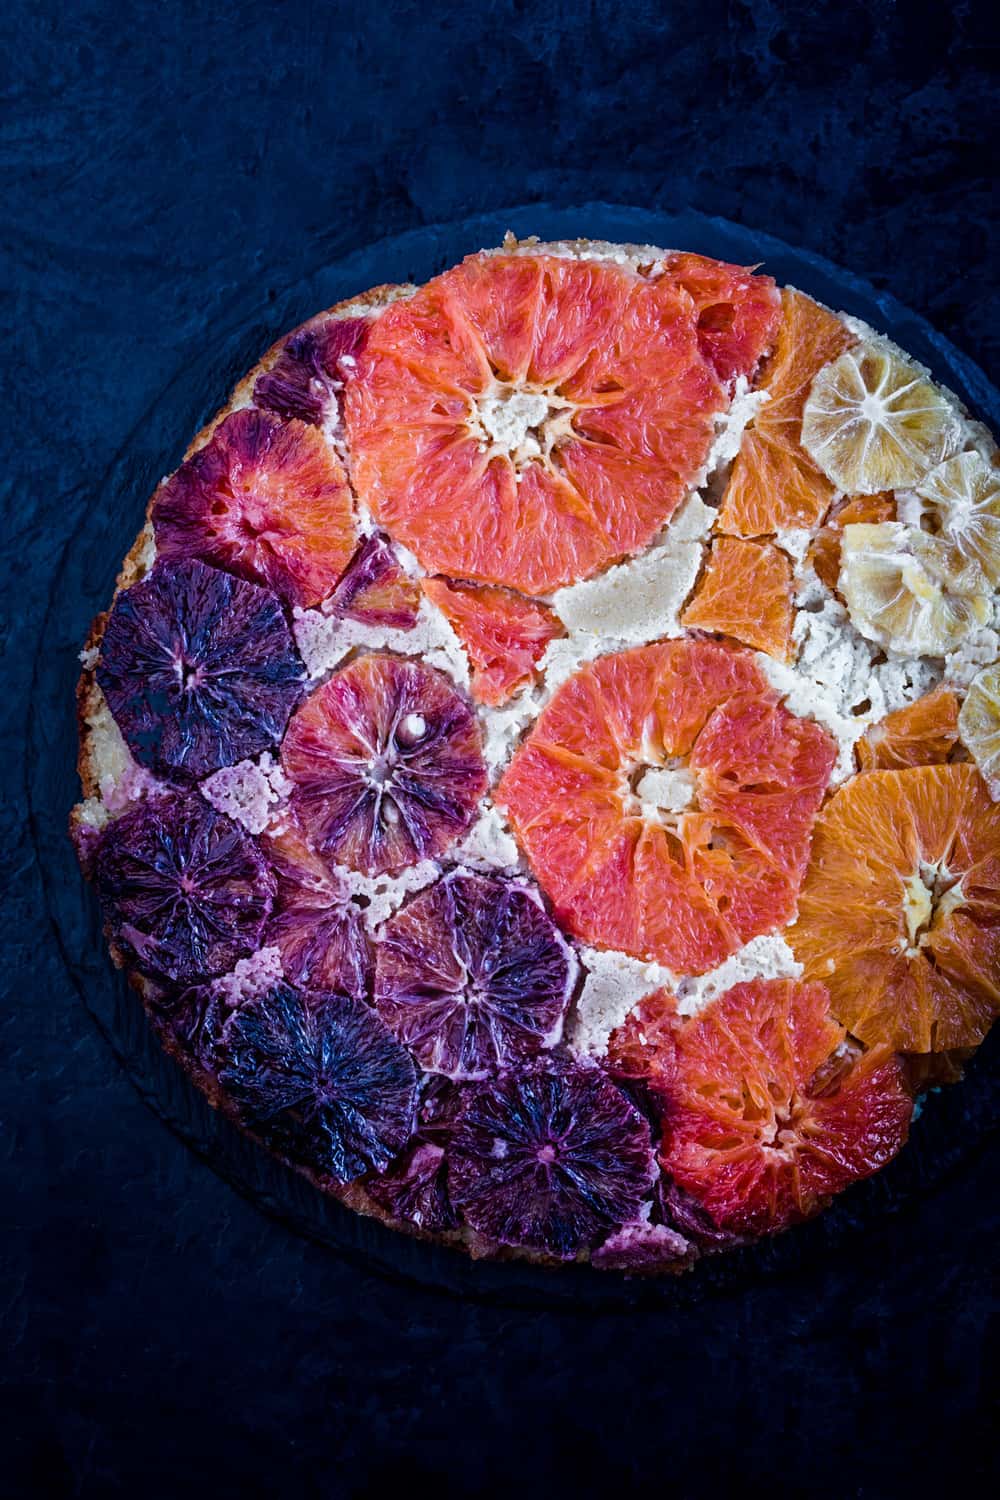 Winter Citrus Upside-Down Cake, all done, made with oranges, grapefruit, blood oranges and lemons, arranged in a rainbow.